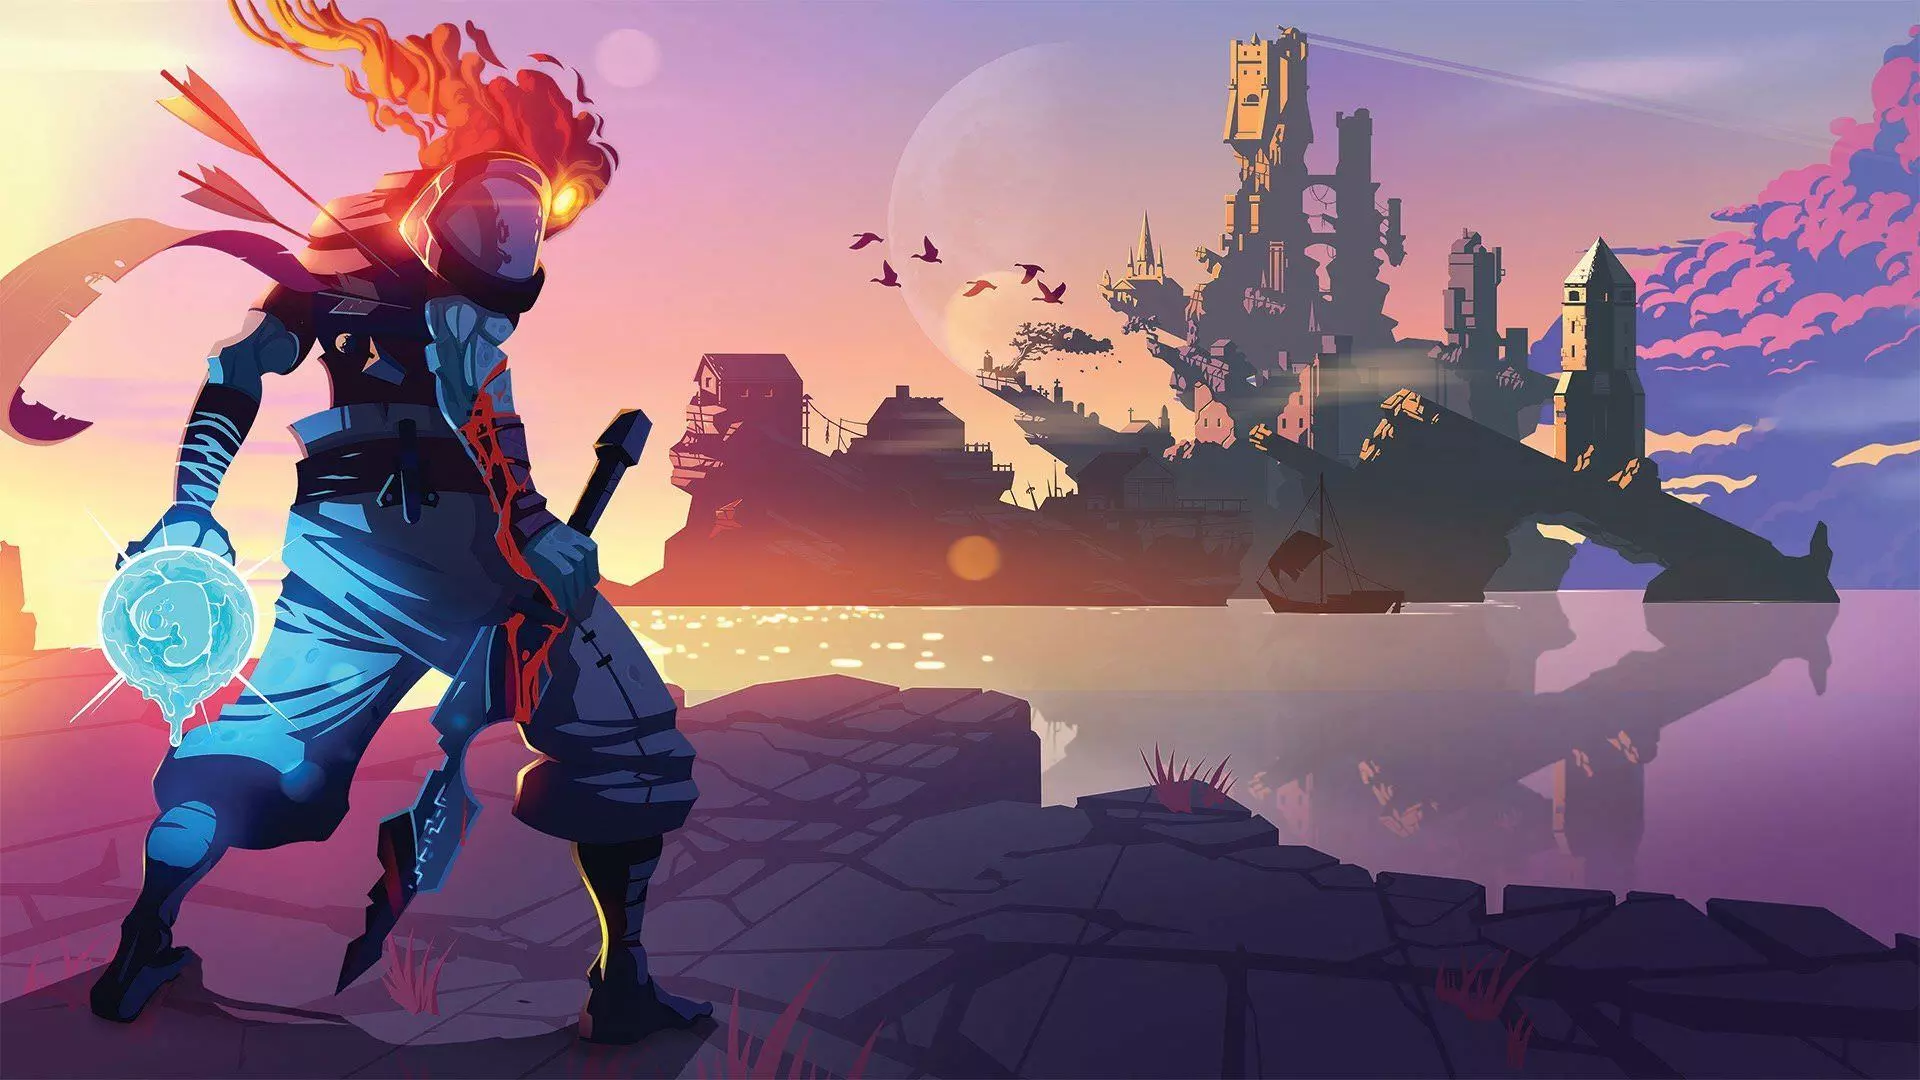 The main character of Dead Cells next to the castle